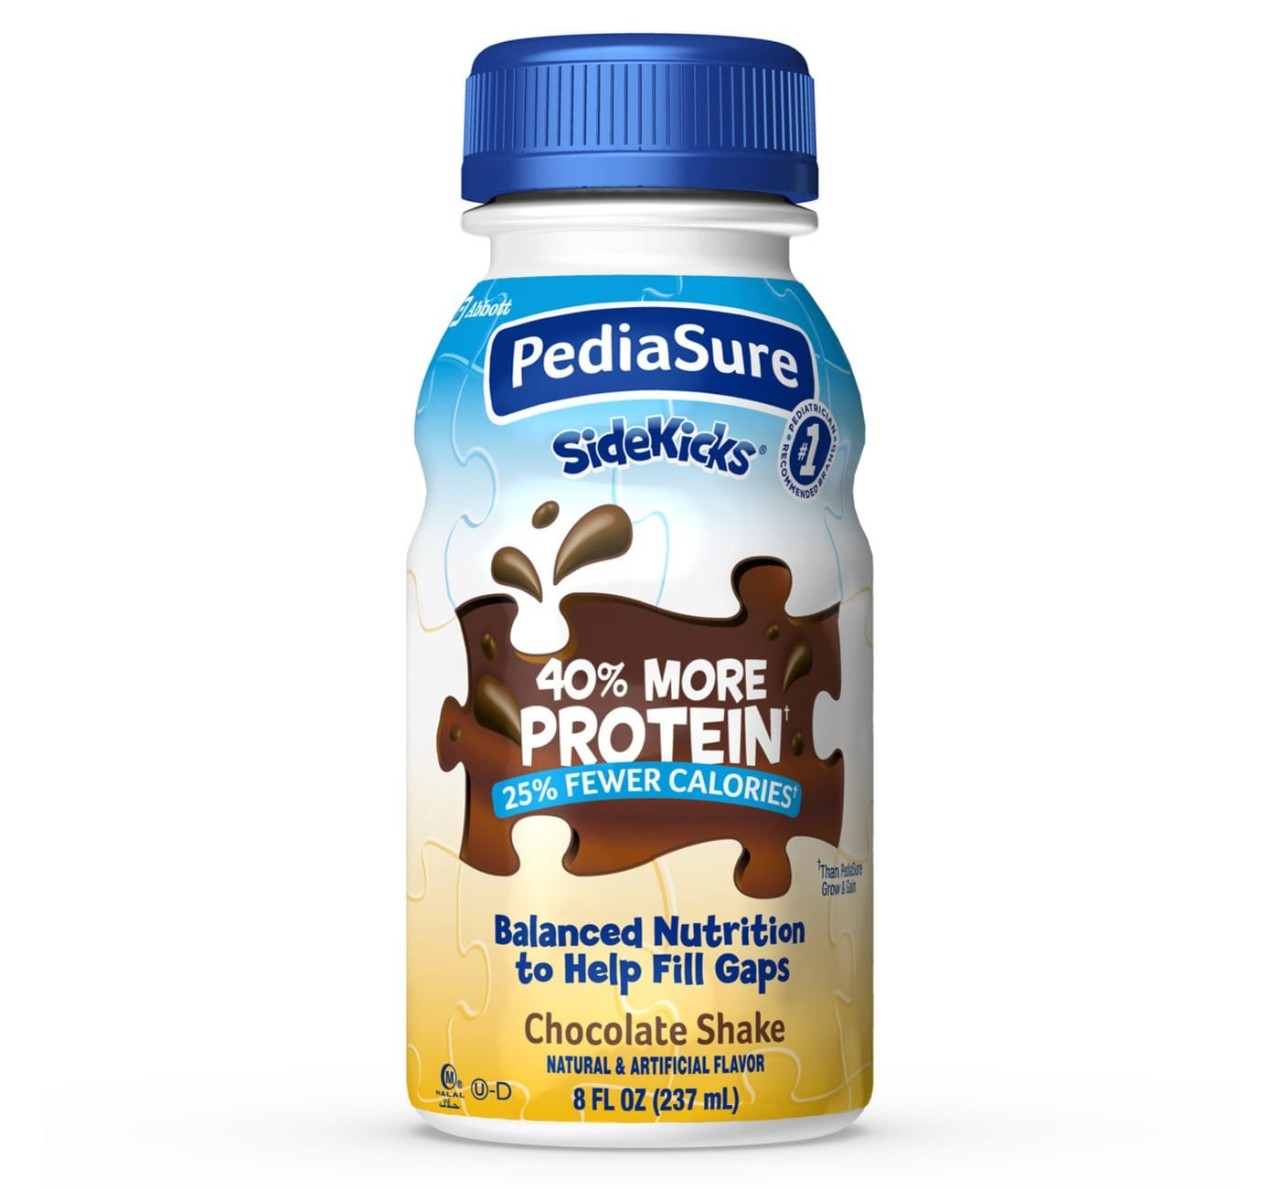 Balanced nutrition that helps fill gaps and has 10g protein to help kids build muscles.